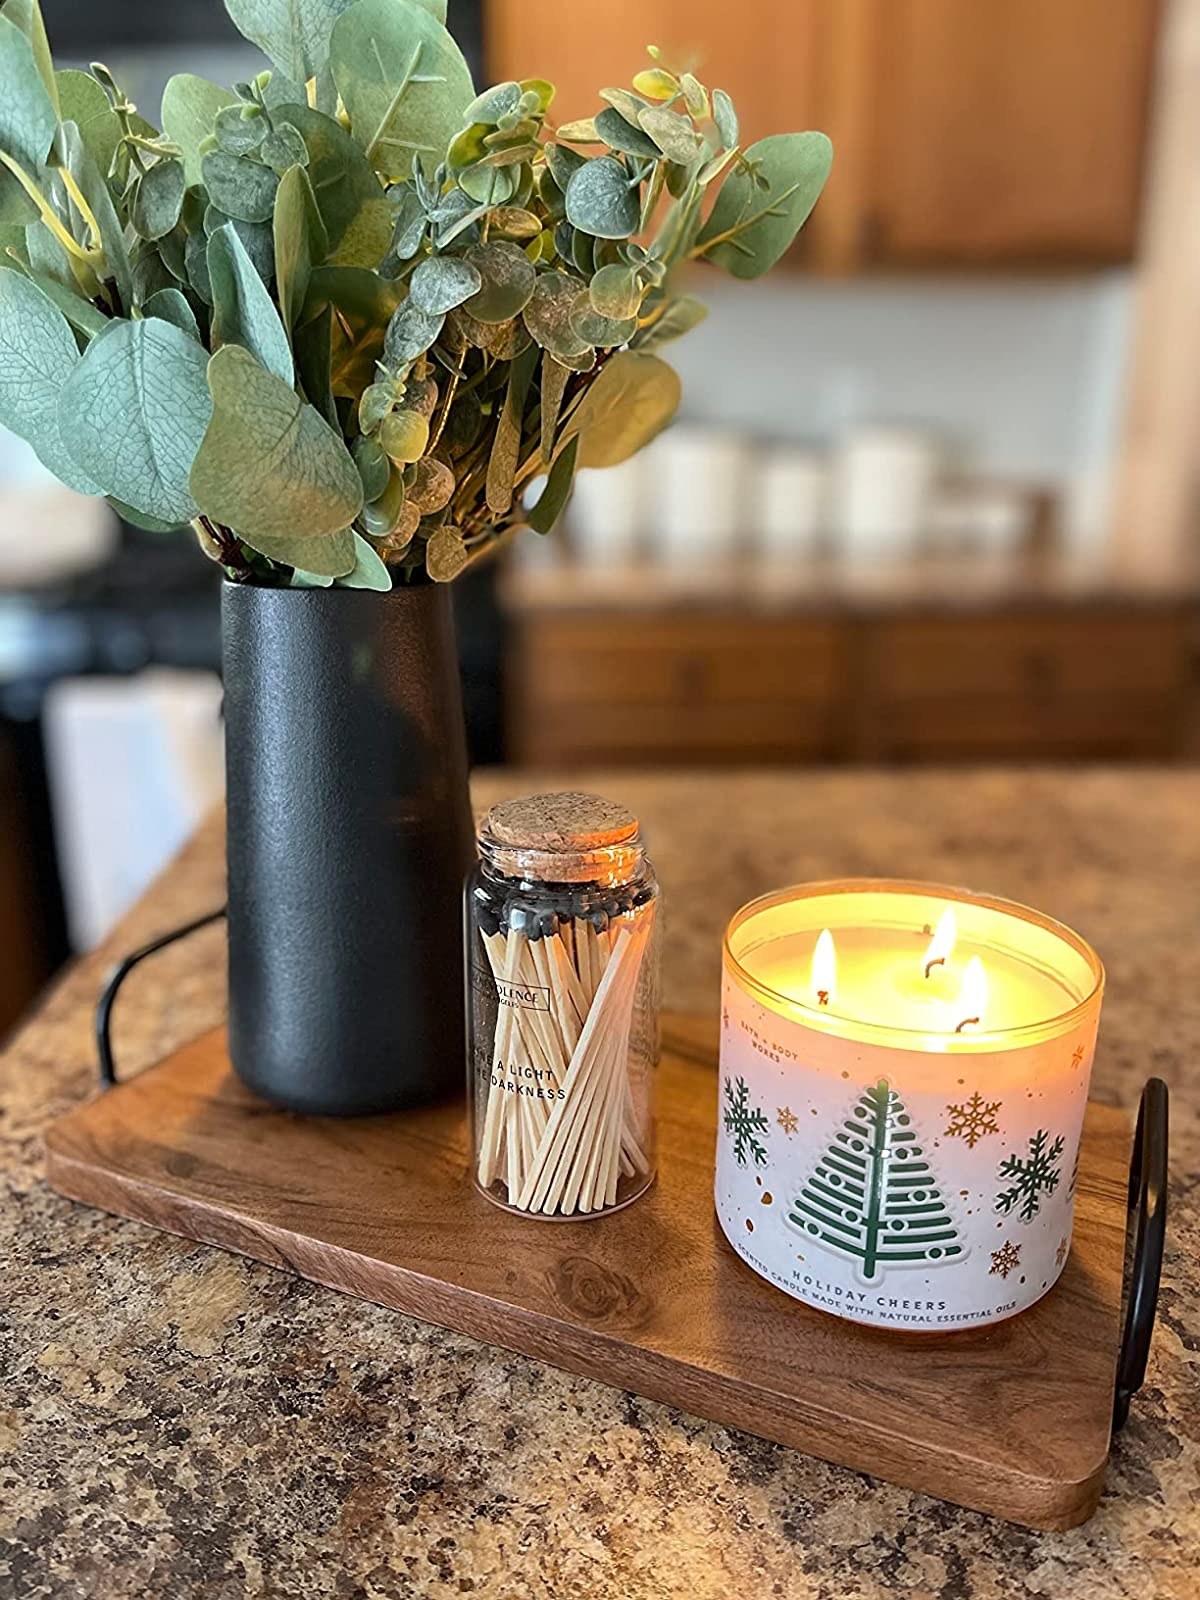 Black vase with eucalyptus leaves on wooden slab next candle and bottle of matches